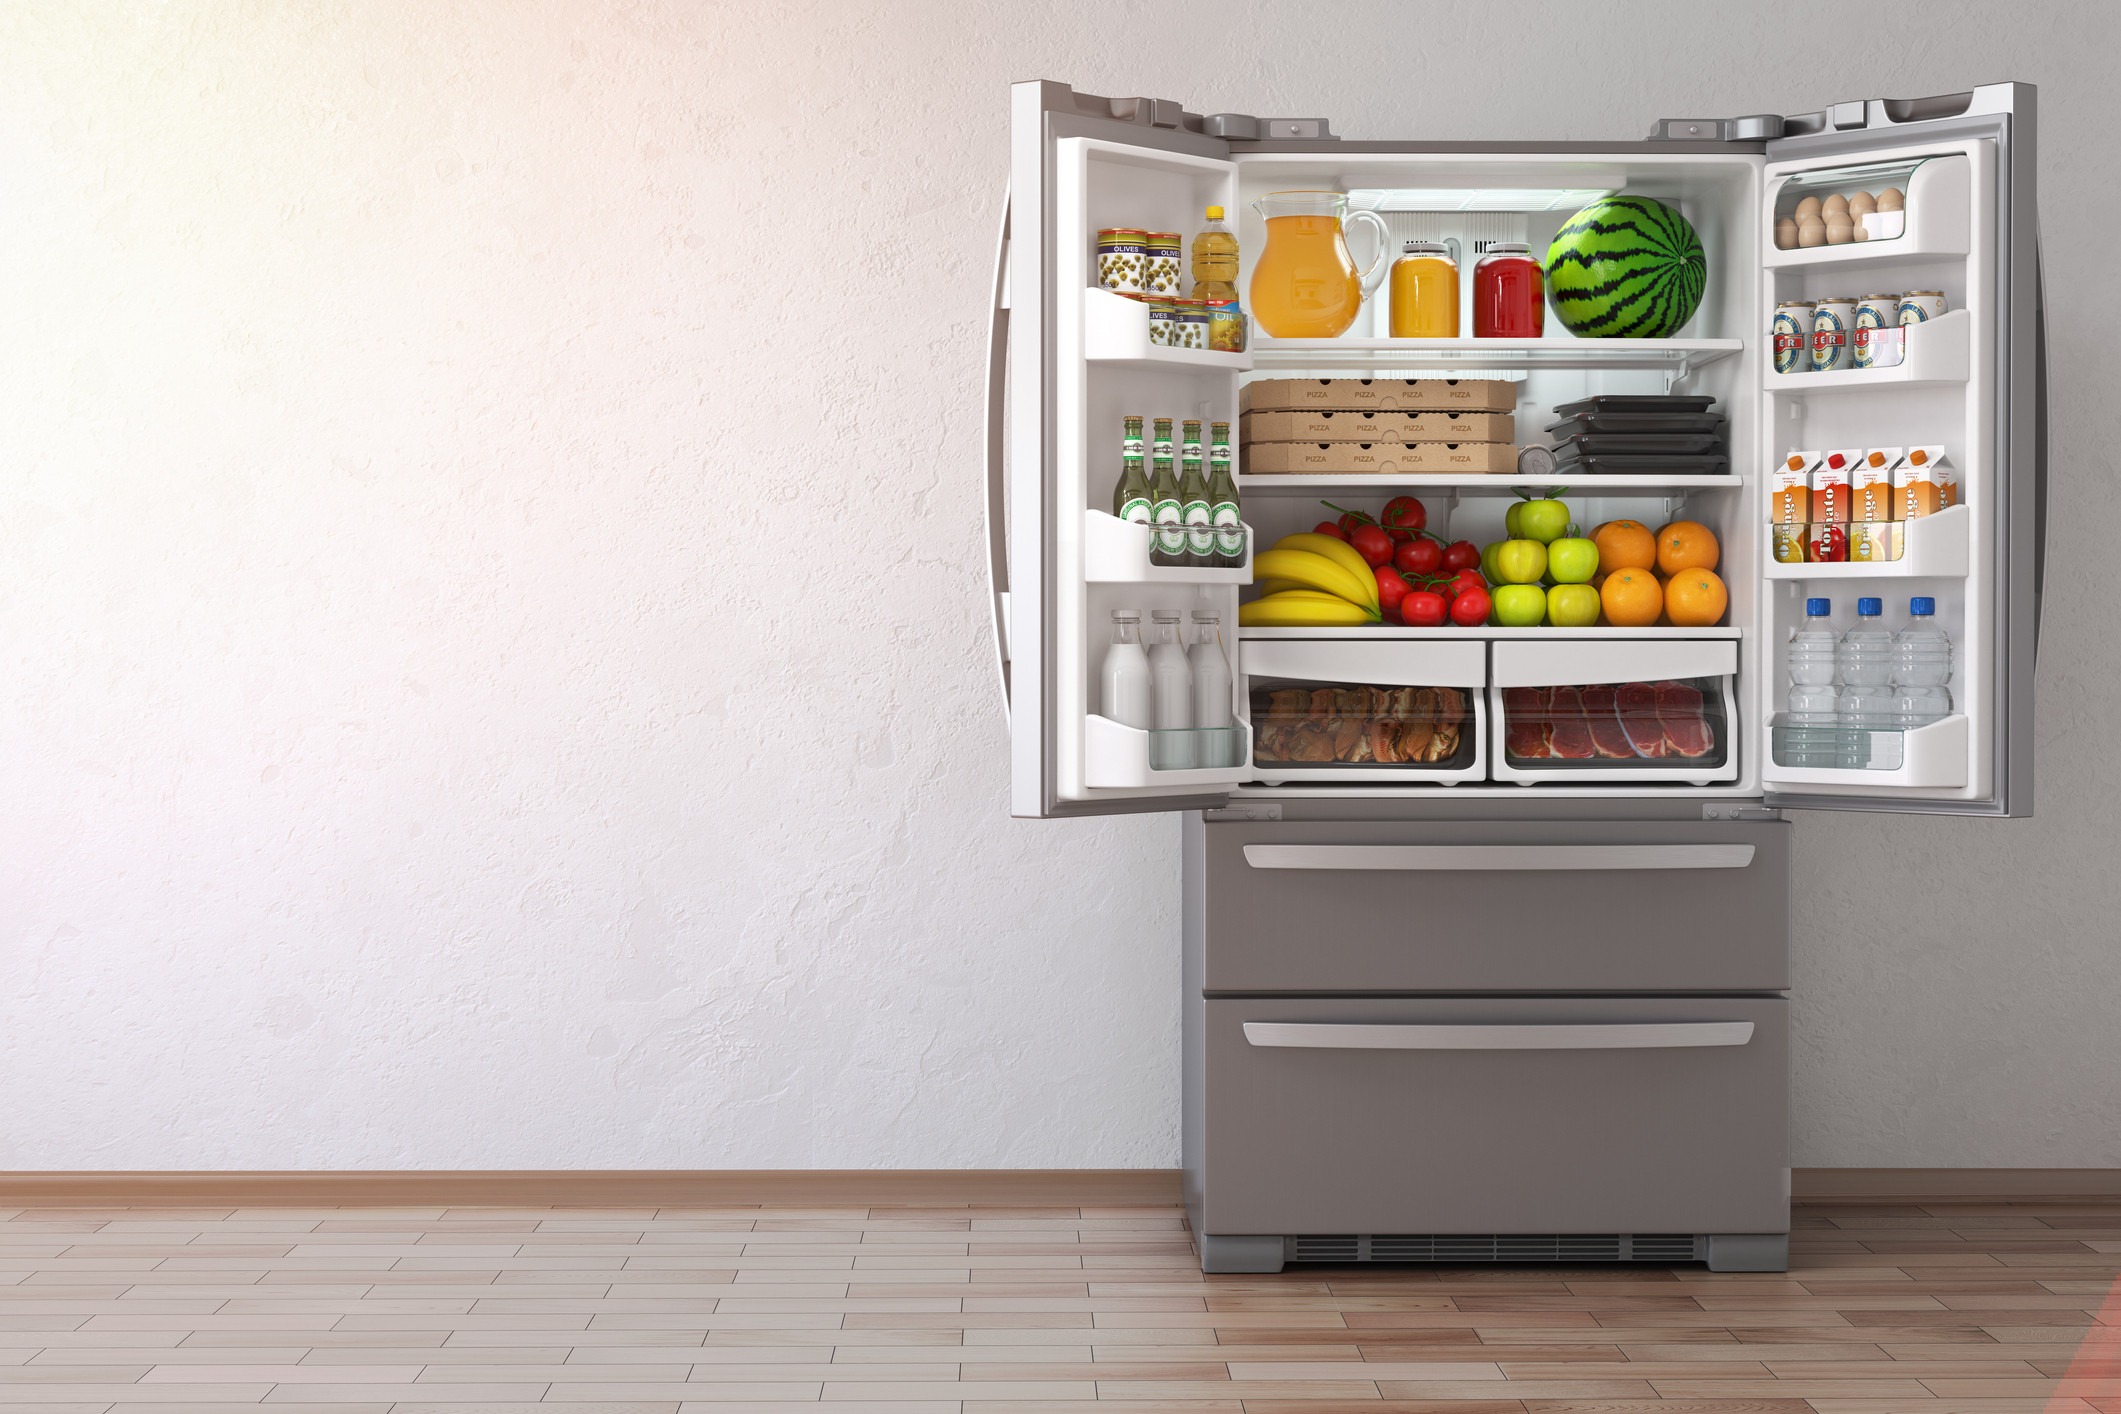 Simple Tips to Help You Properly Care for and Maintain Your Fridge and Freezer - American Appliance Repair